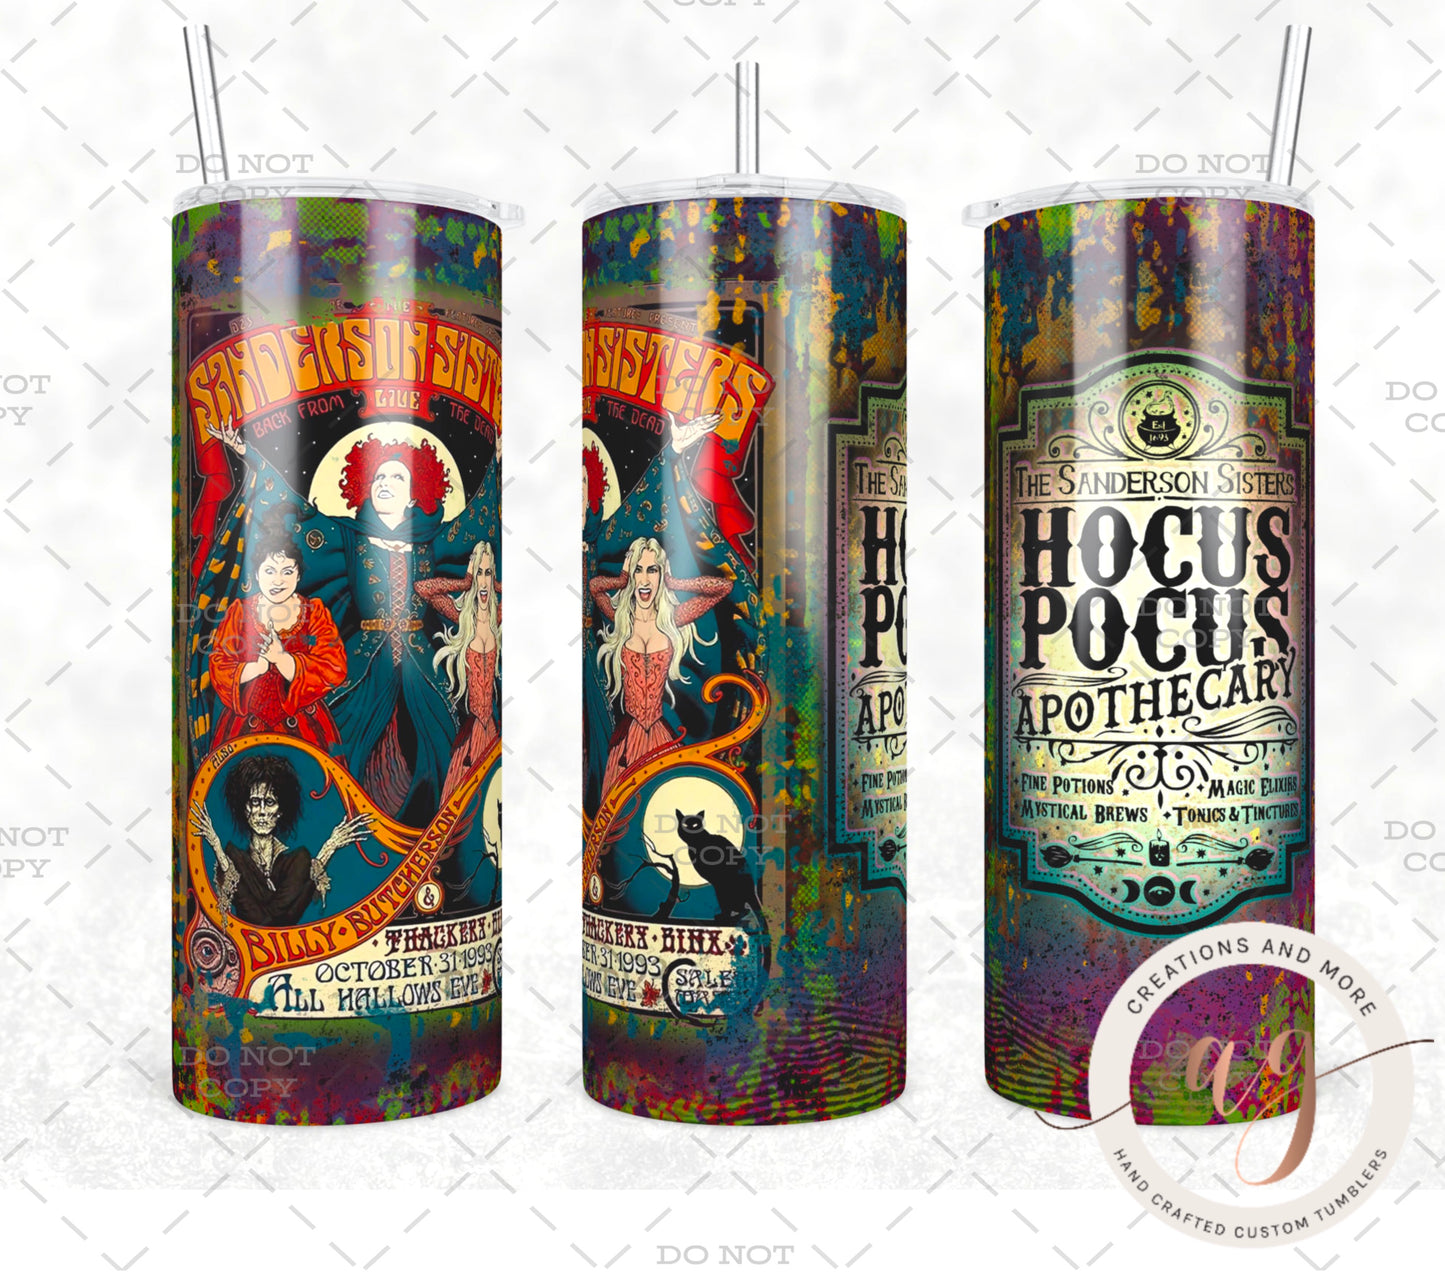 Hocus Pocus Apothecary Sanderson Sister's Sublimation Ready To Press Transfer Sheets